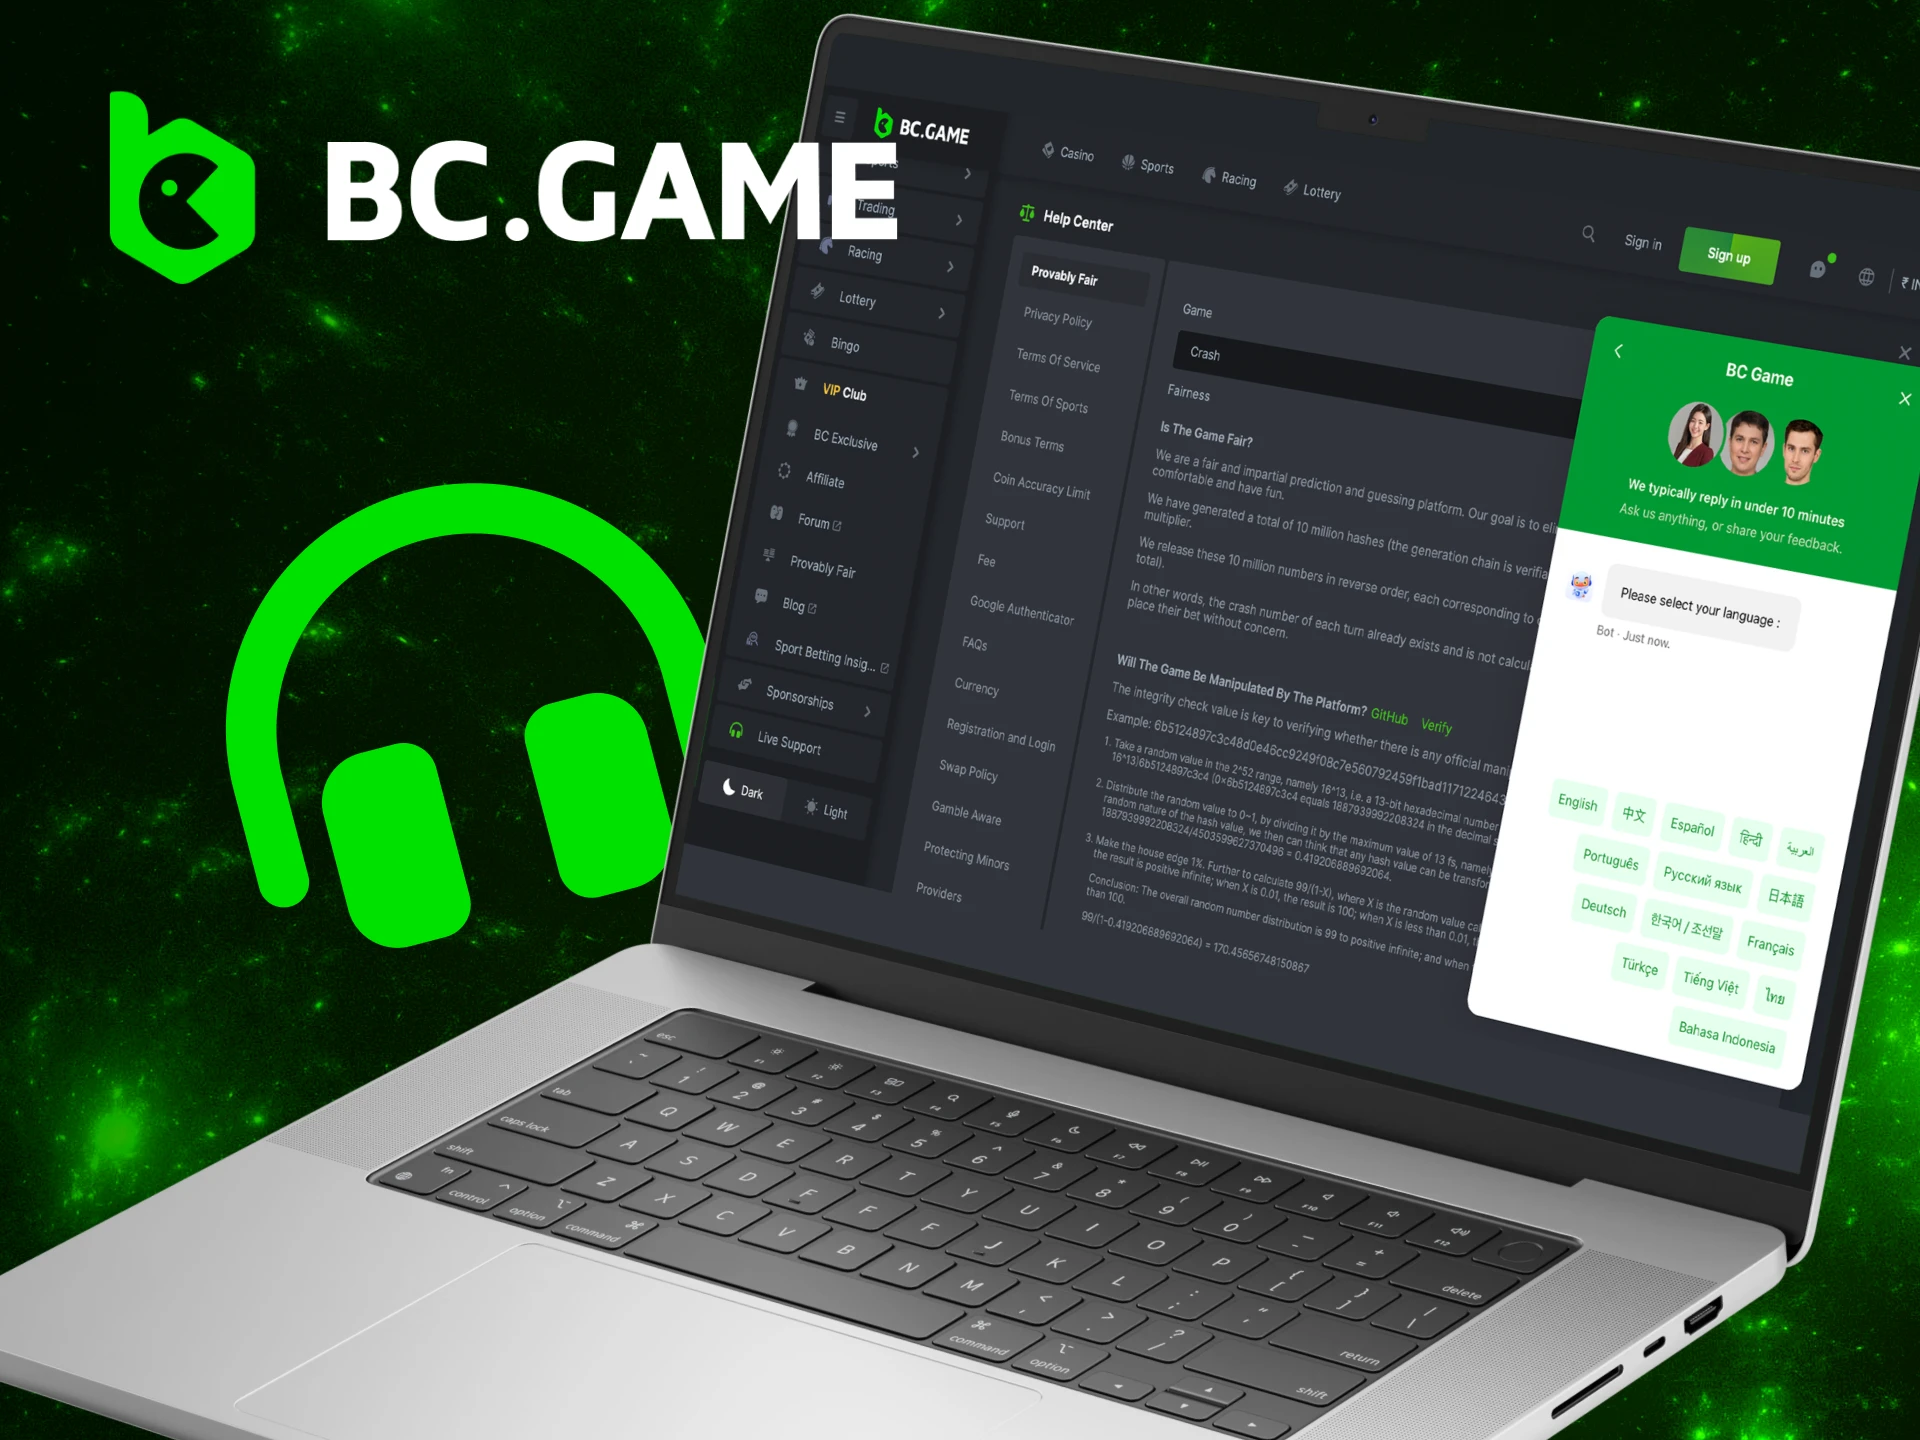 How can I contact technical support of the BC Game website via live chat.